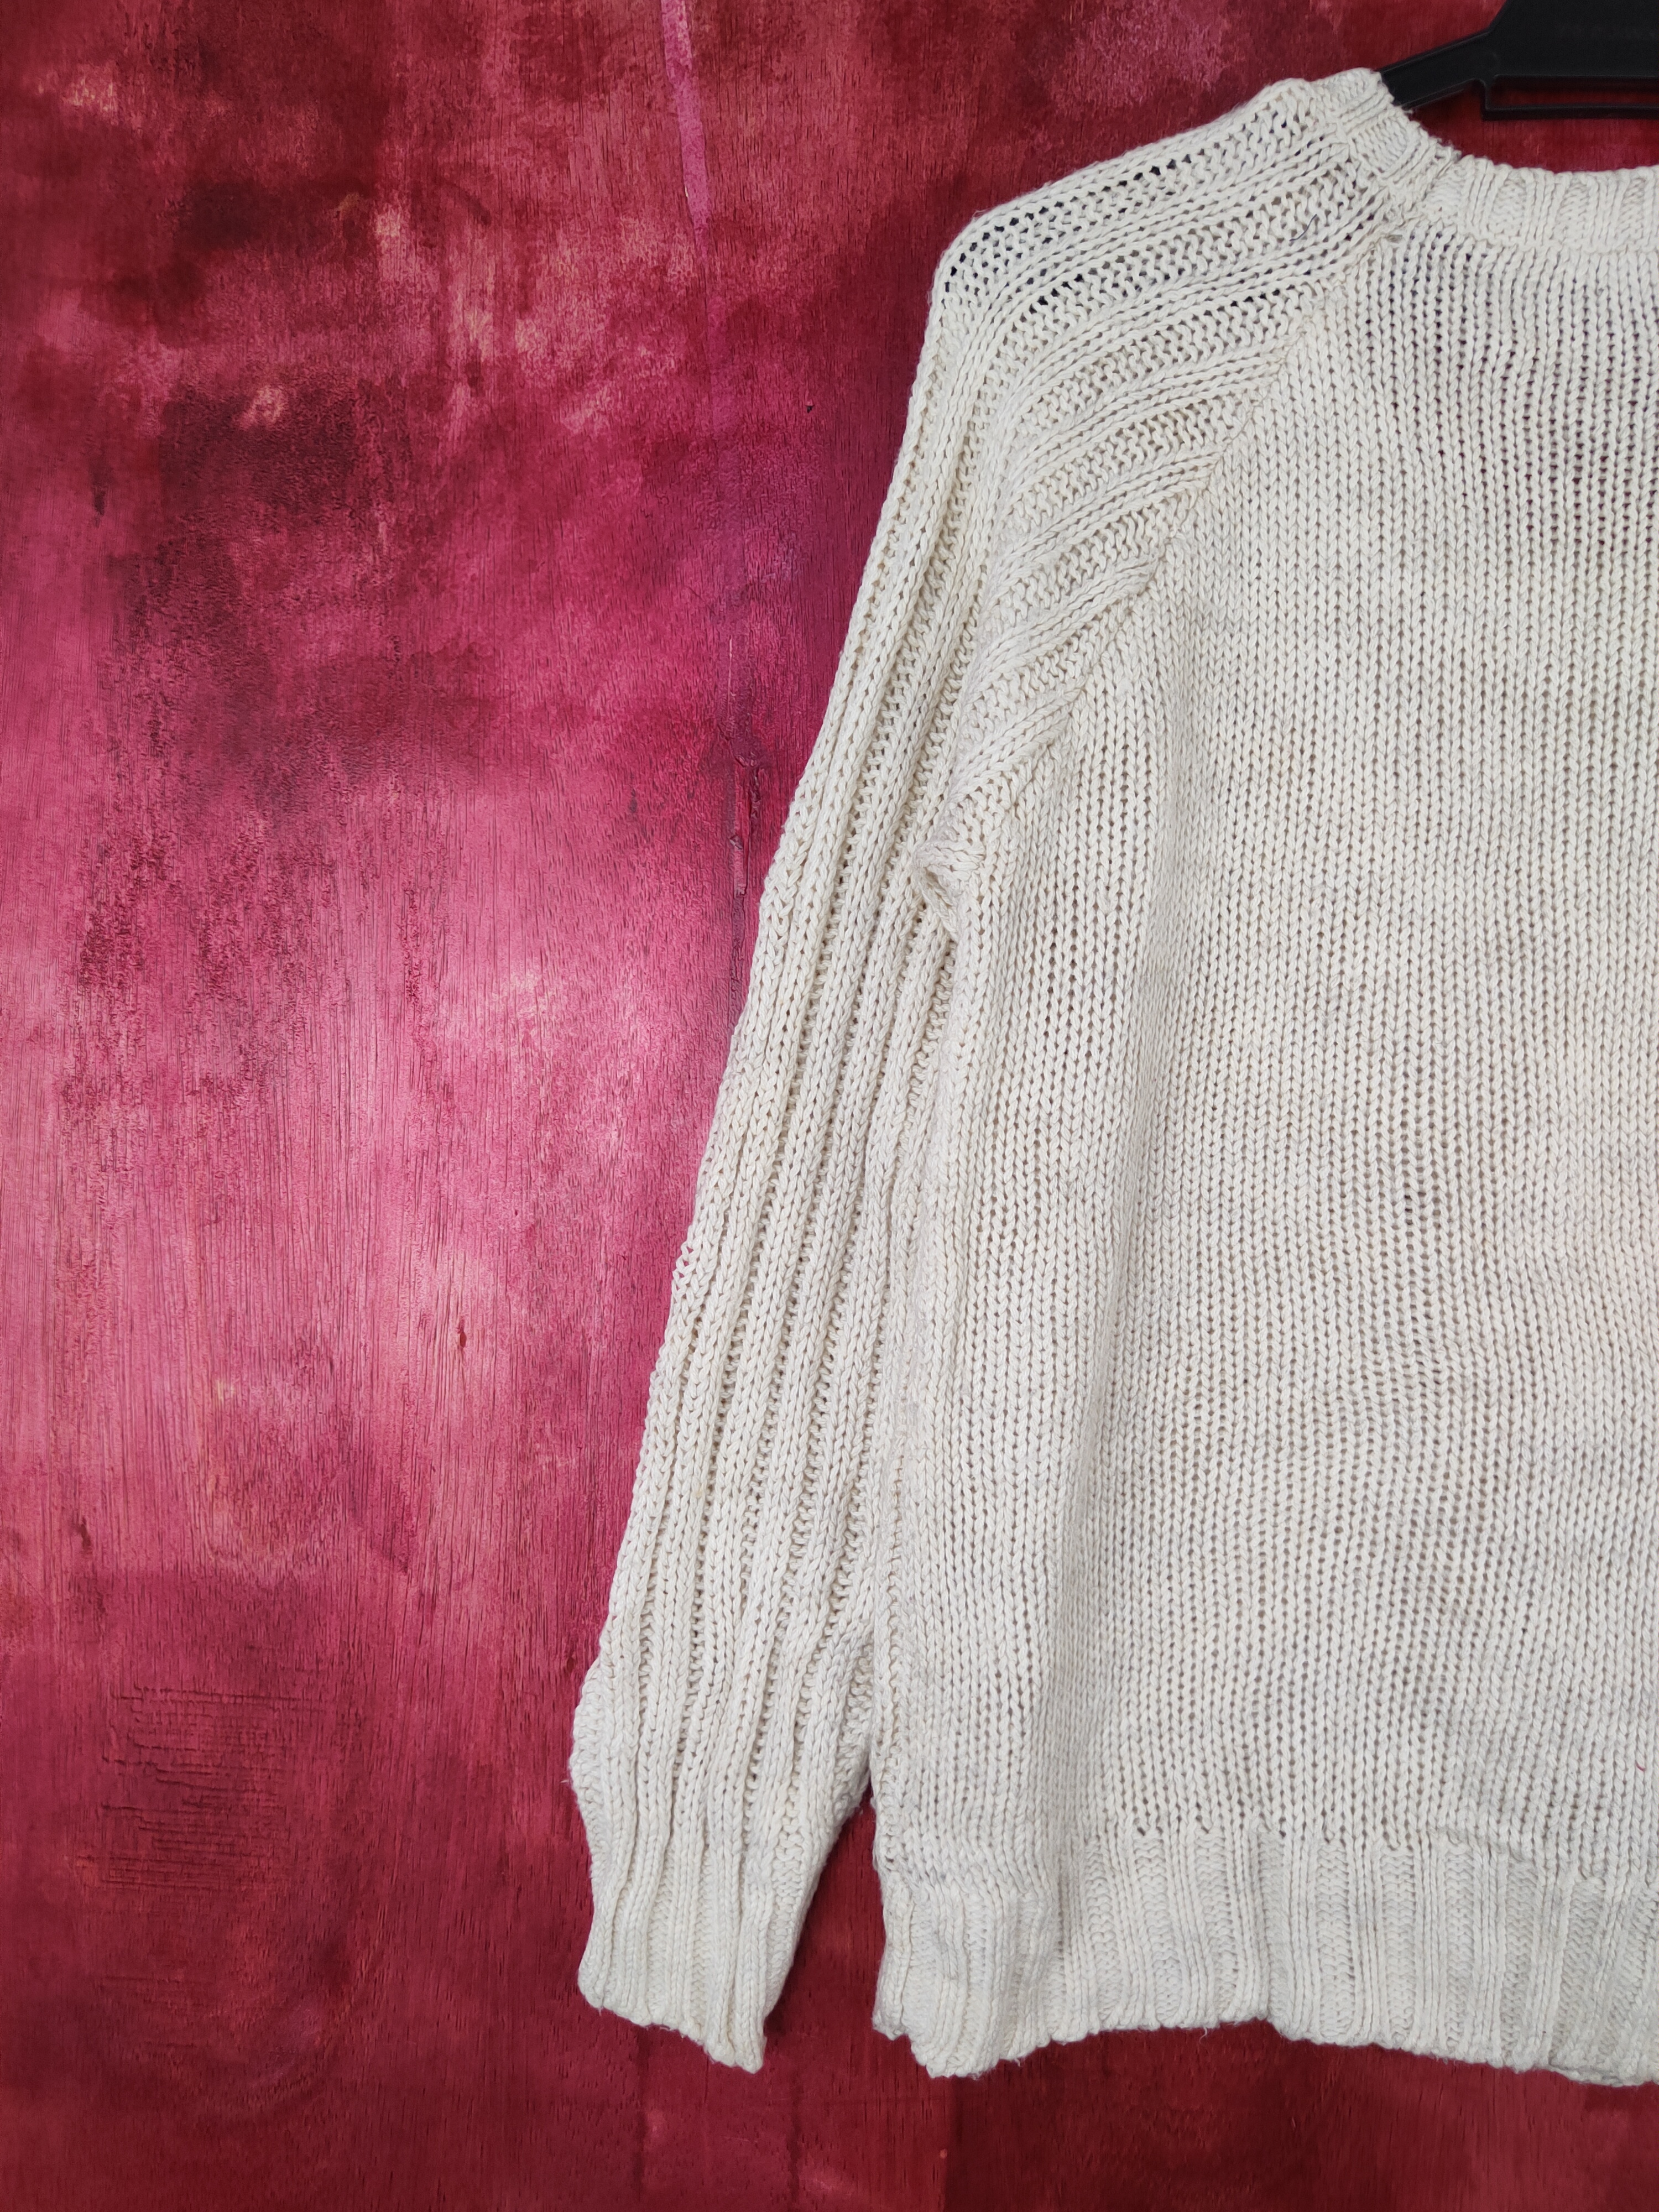 Japanese Brand - Archives White Knitwear Sweater Damage With Stain - 8